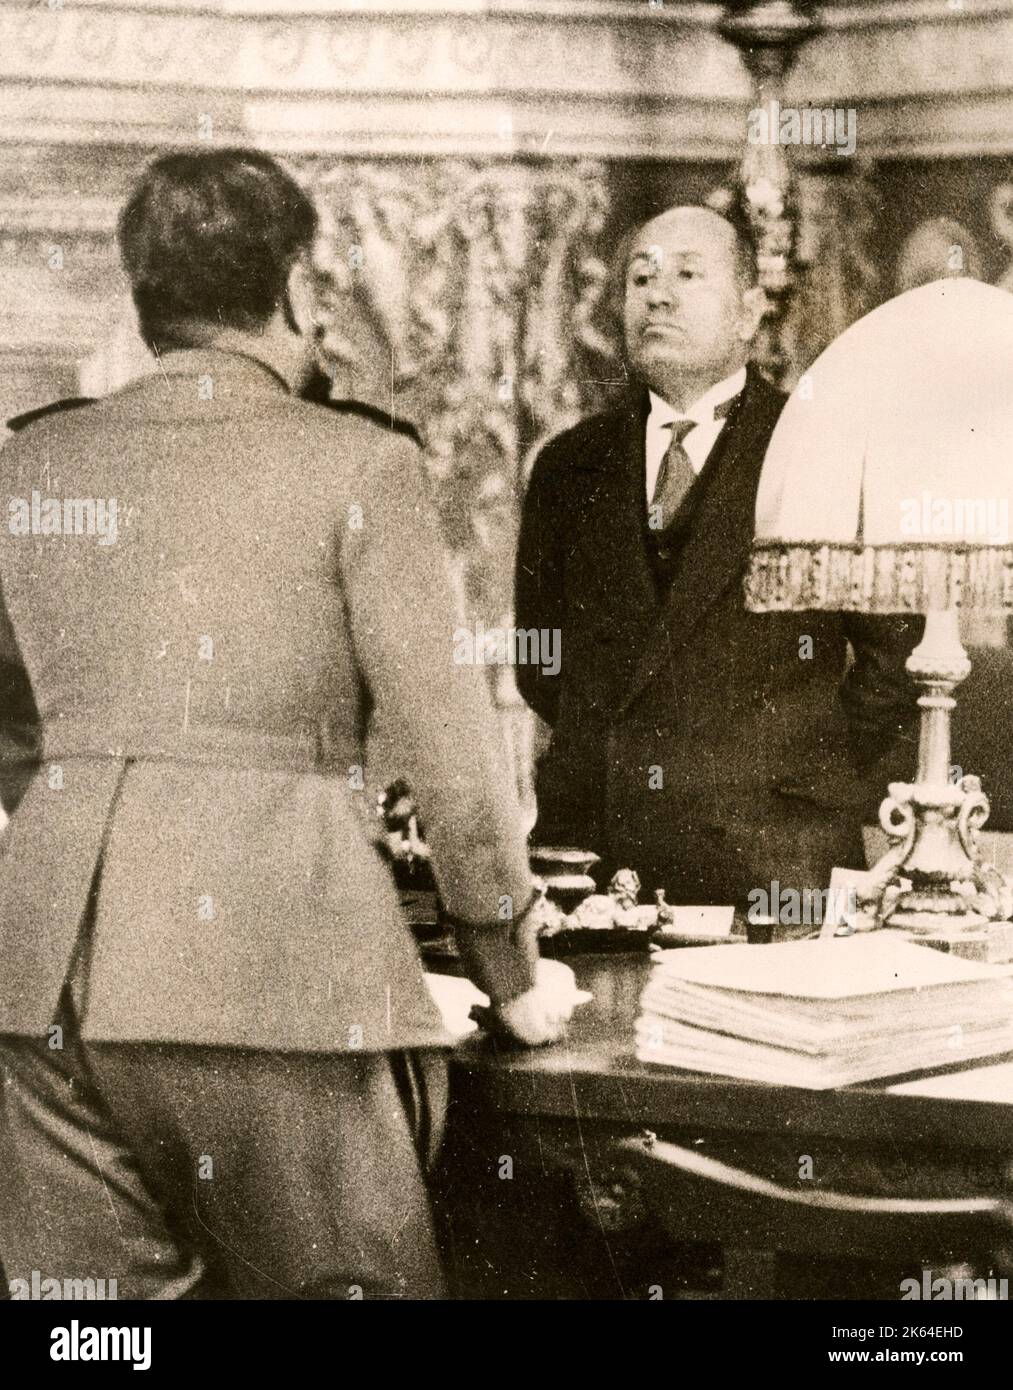 Early 20th century vintage press photograph - Benito Mussolini, Italian fascist leader, in converstion with his militia chief, c.1920s Stock Photo